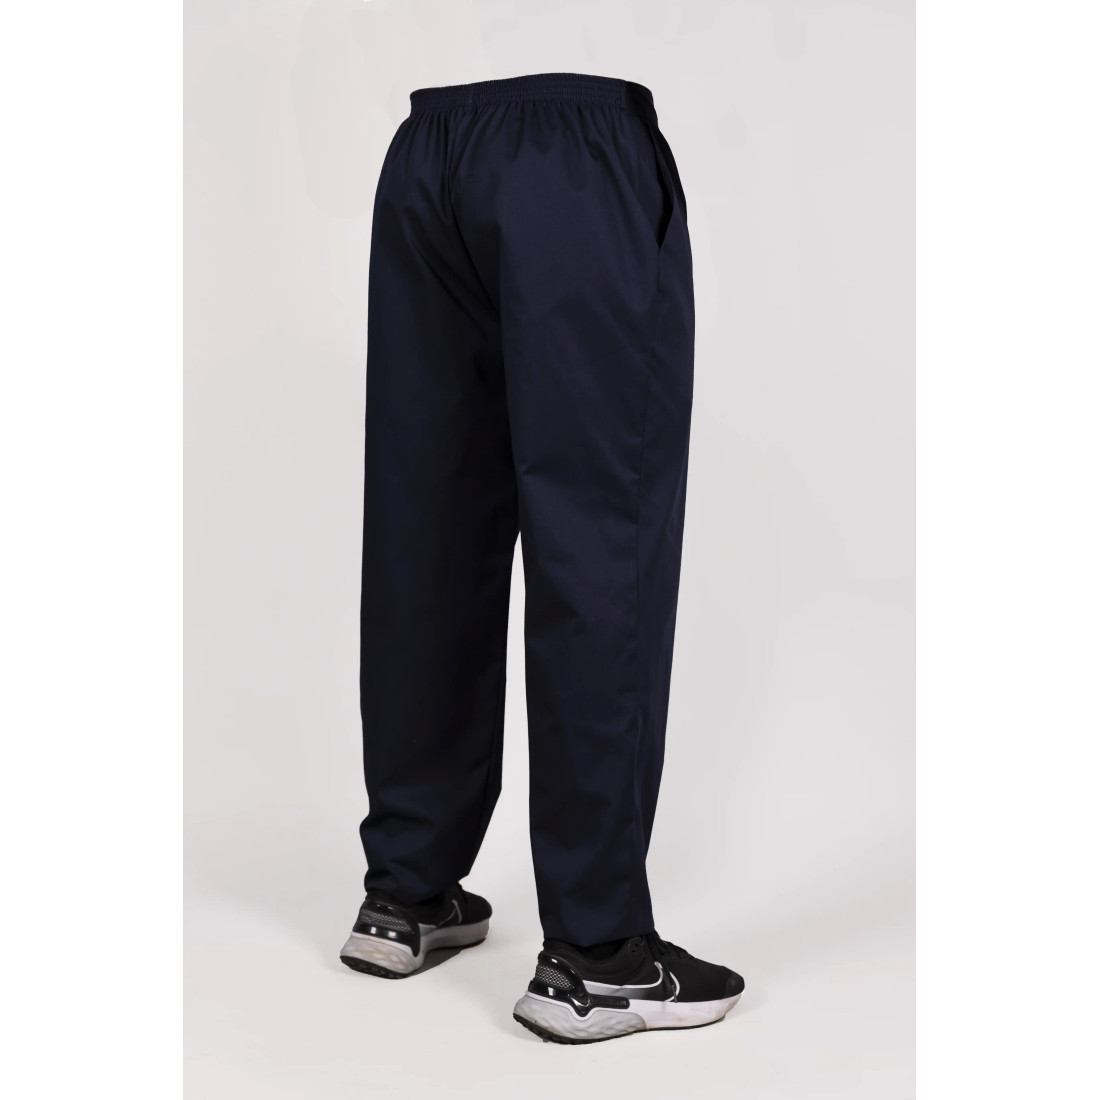 Male Healthcare Trousers